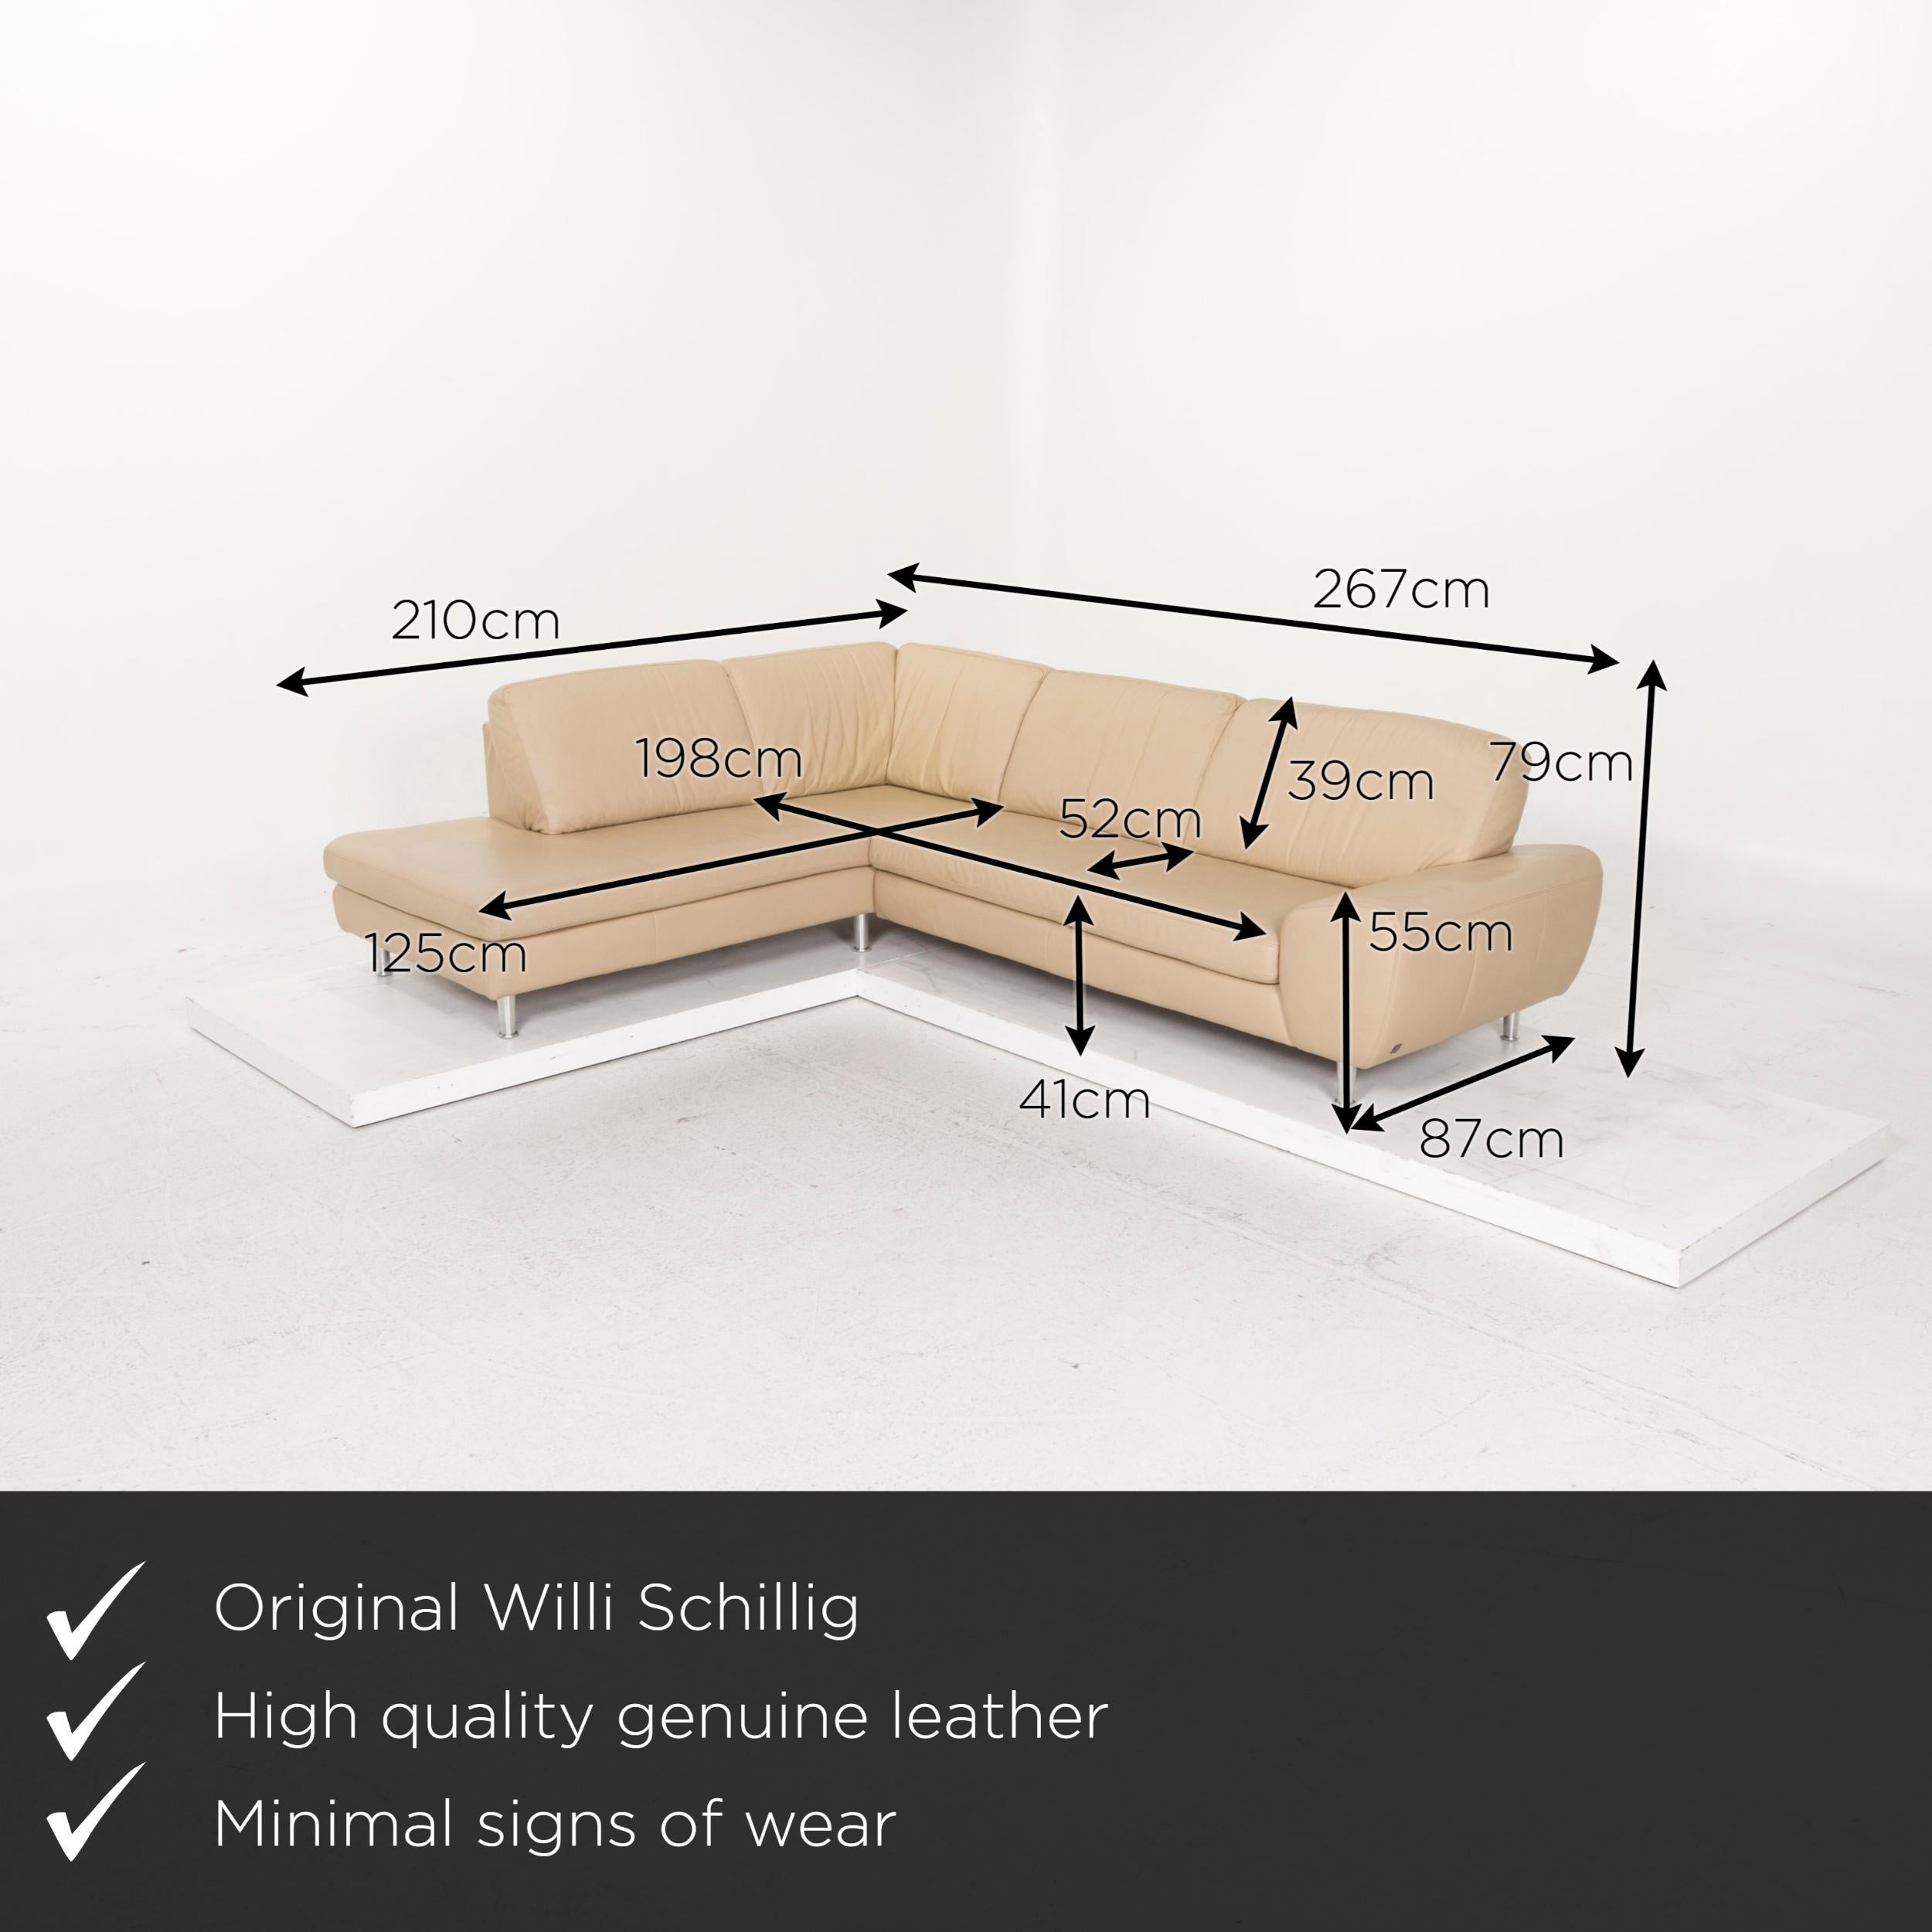 We present to you a Willi Schillig leather sofa set beige corner sofa stool.


 Product measurements in centimeters:
 

Depth 87
Width 210
Height 79
Seat height 41
Rest height 55
Seat depth 52
Seat width 125
Back height 39.
 